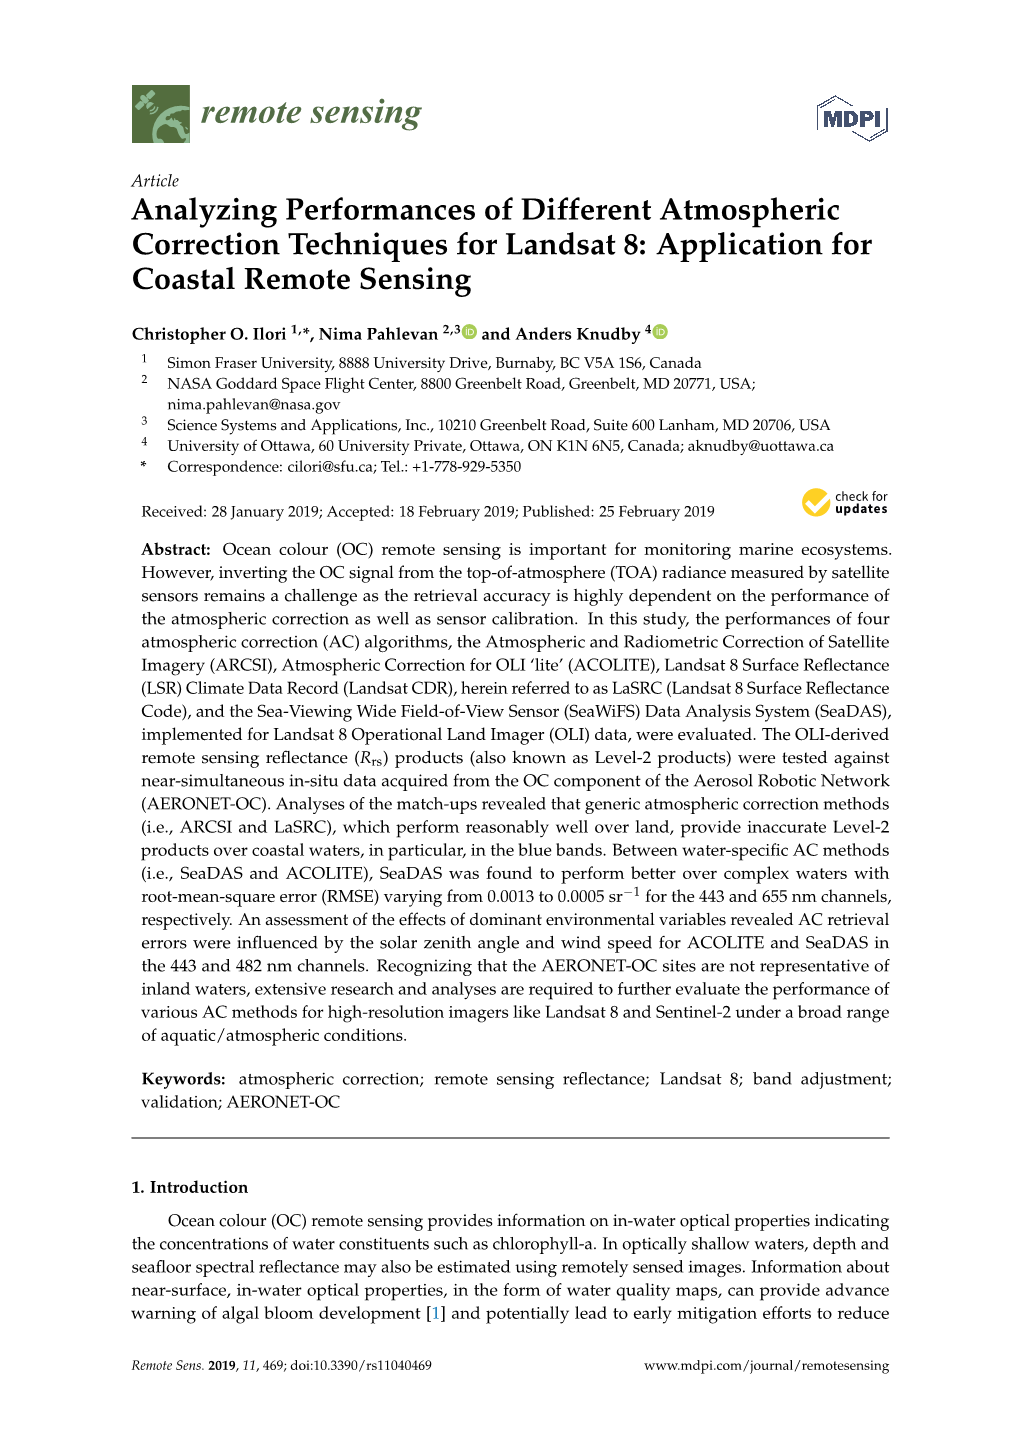 Analyzing Performances of Different Atmospheric Correction Techniques for Landsat 8: Application for Coastal Remote Sensing